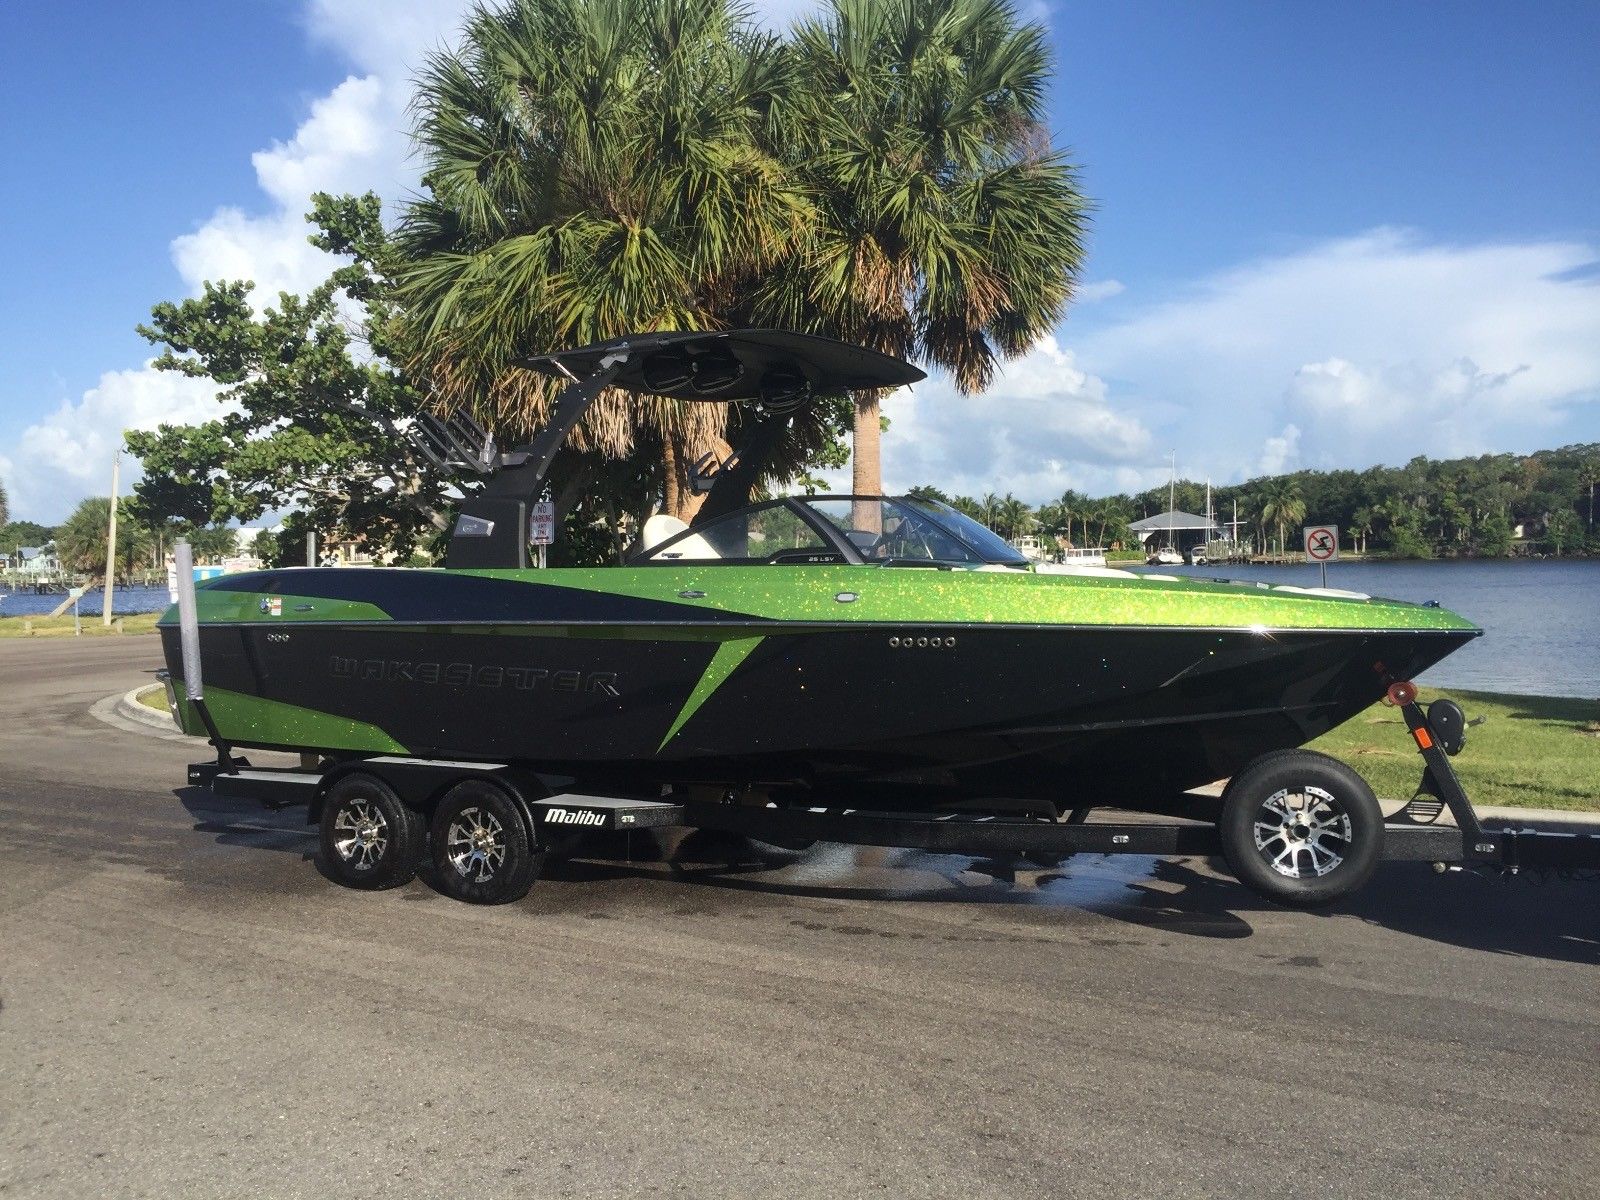 Malibu Wakesetter 25 LSV 2016 for sale for $99,900 - Boats ...